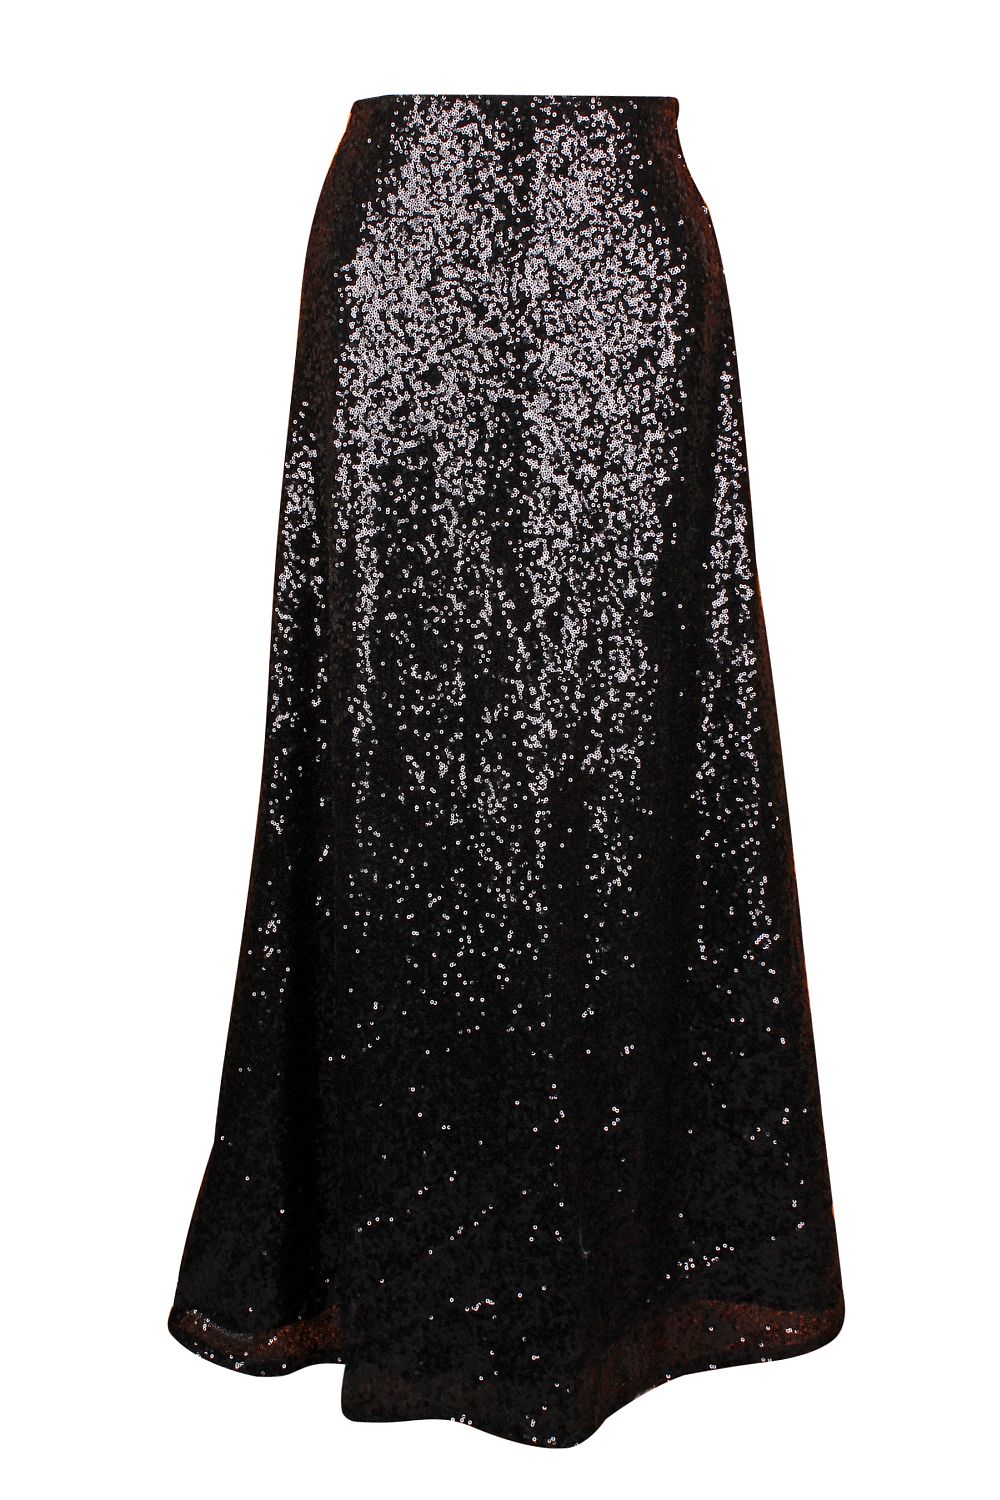 Long Sequin Skirt with Thigh High Slit - Black